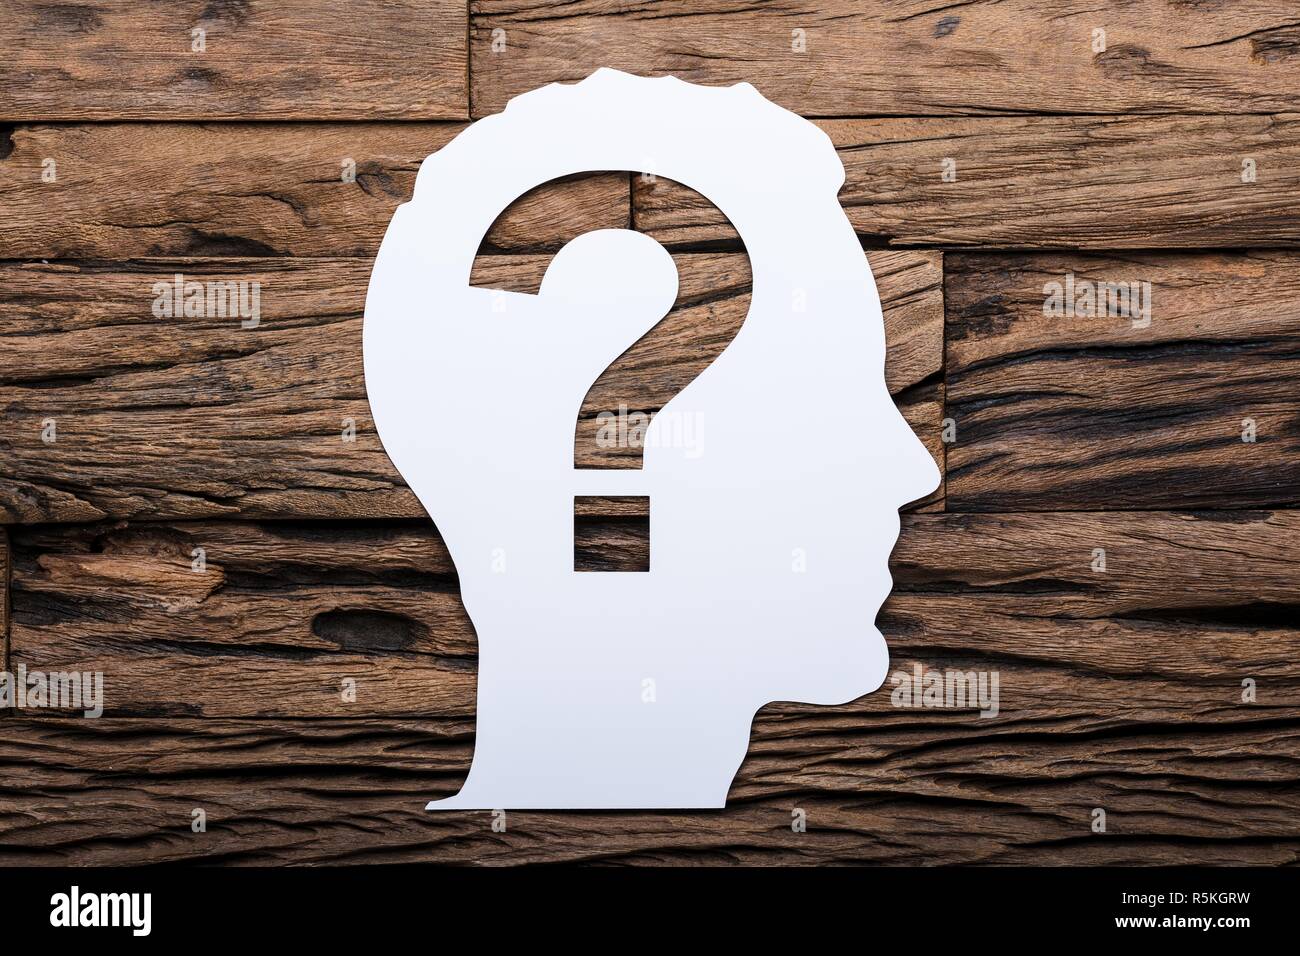 Paper Businessman's Head With Question Mark On Wooden Table Stock Photo